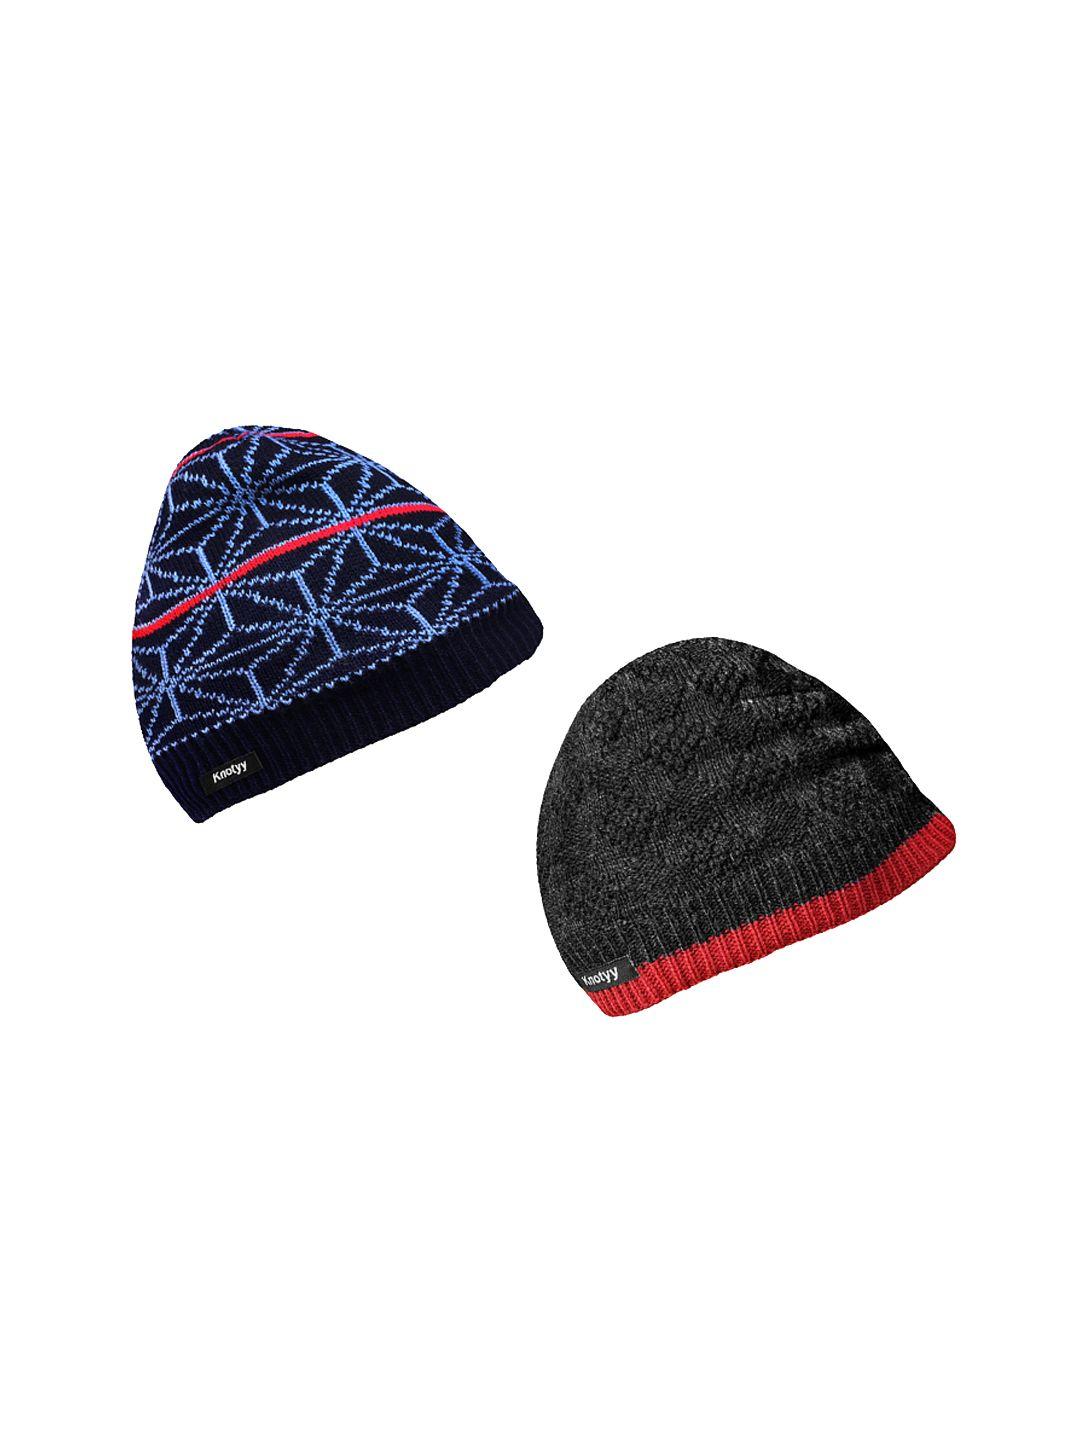 knotyy men pack of 2 blue & charcoal black self design beanie